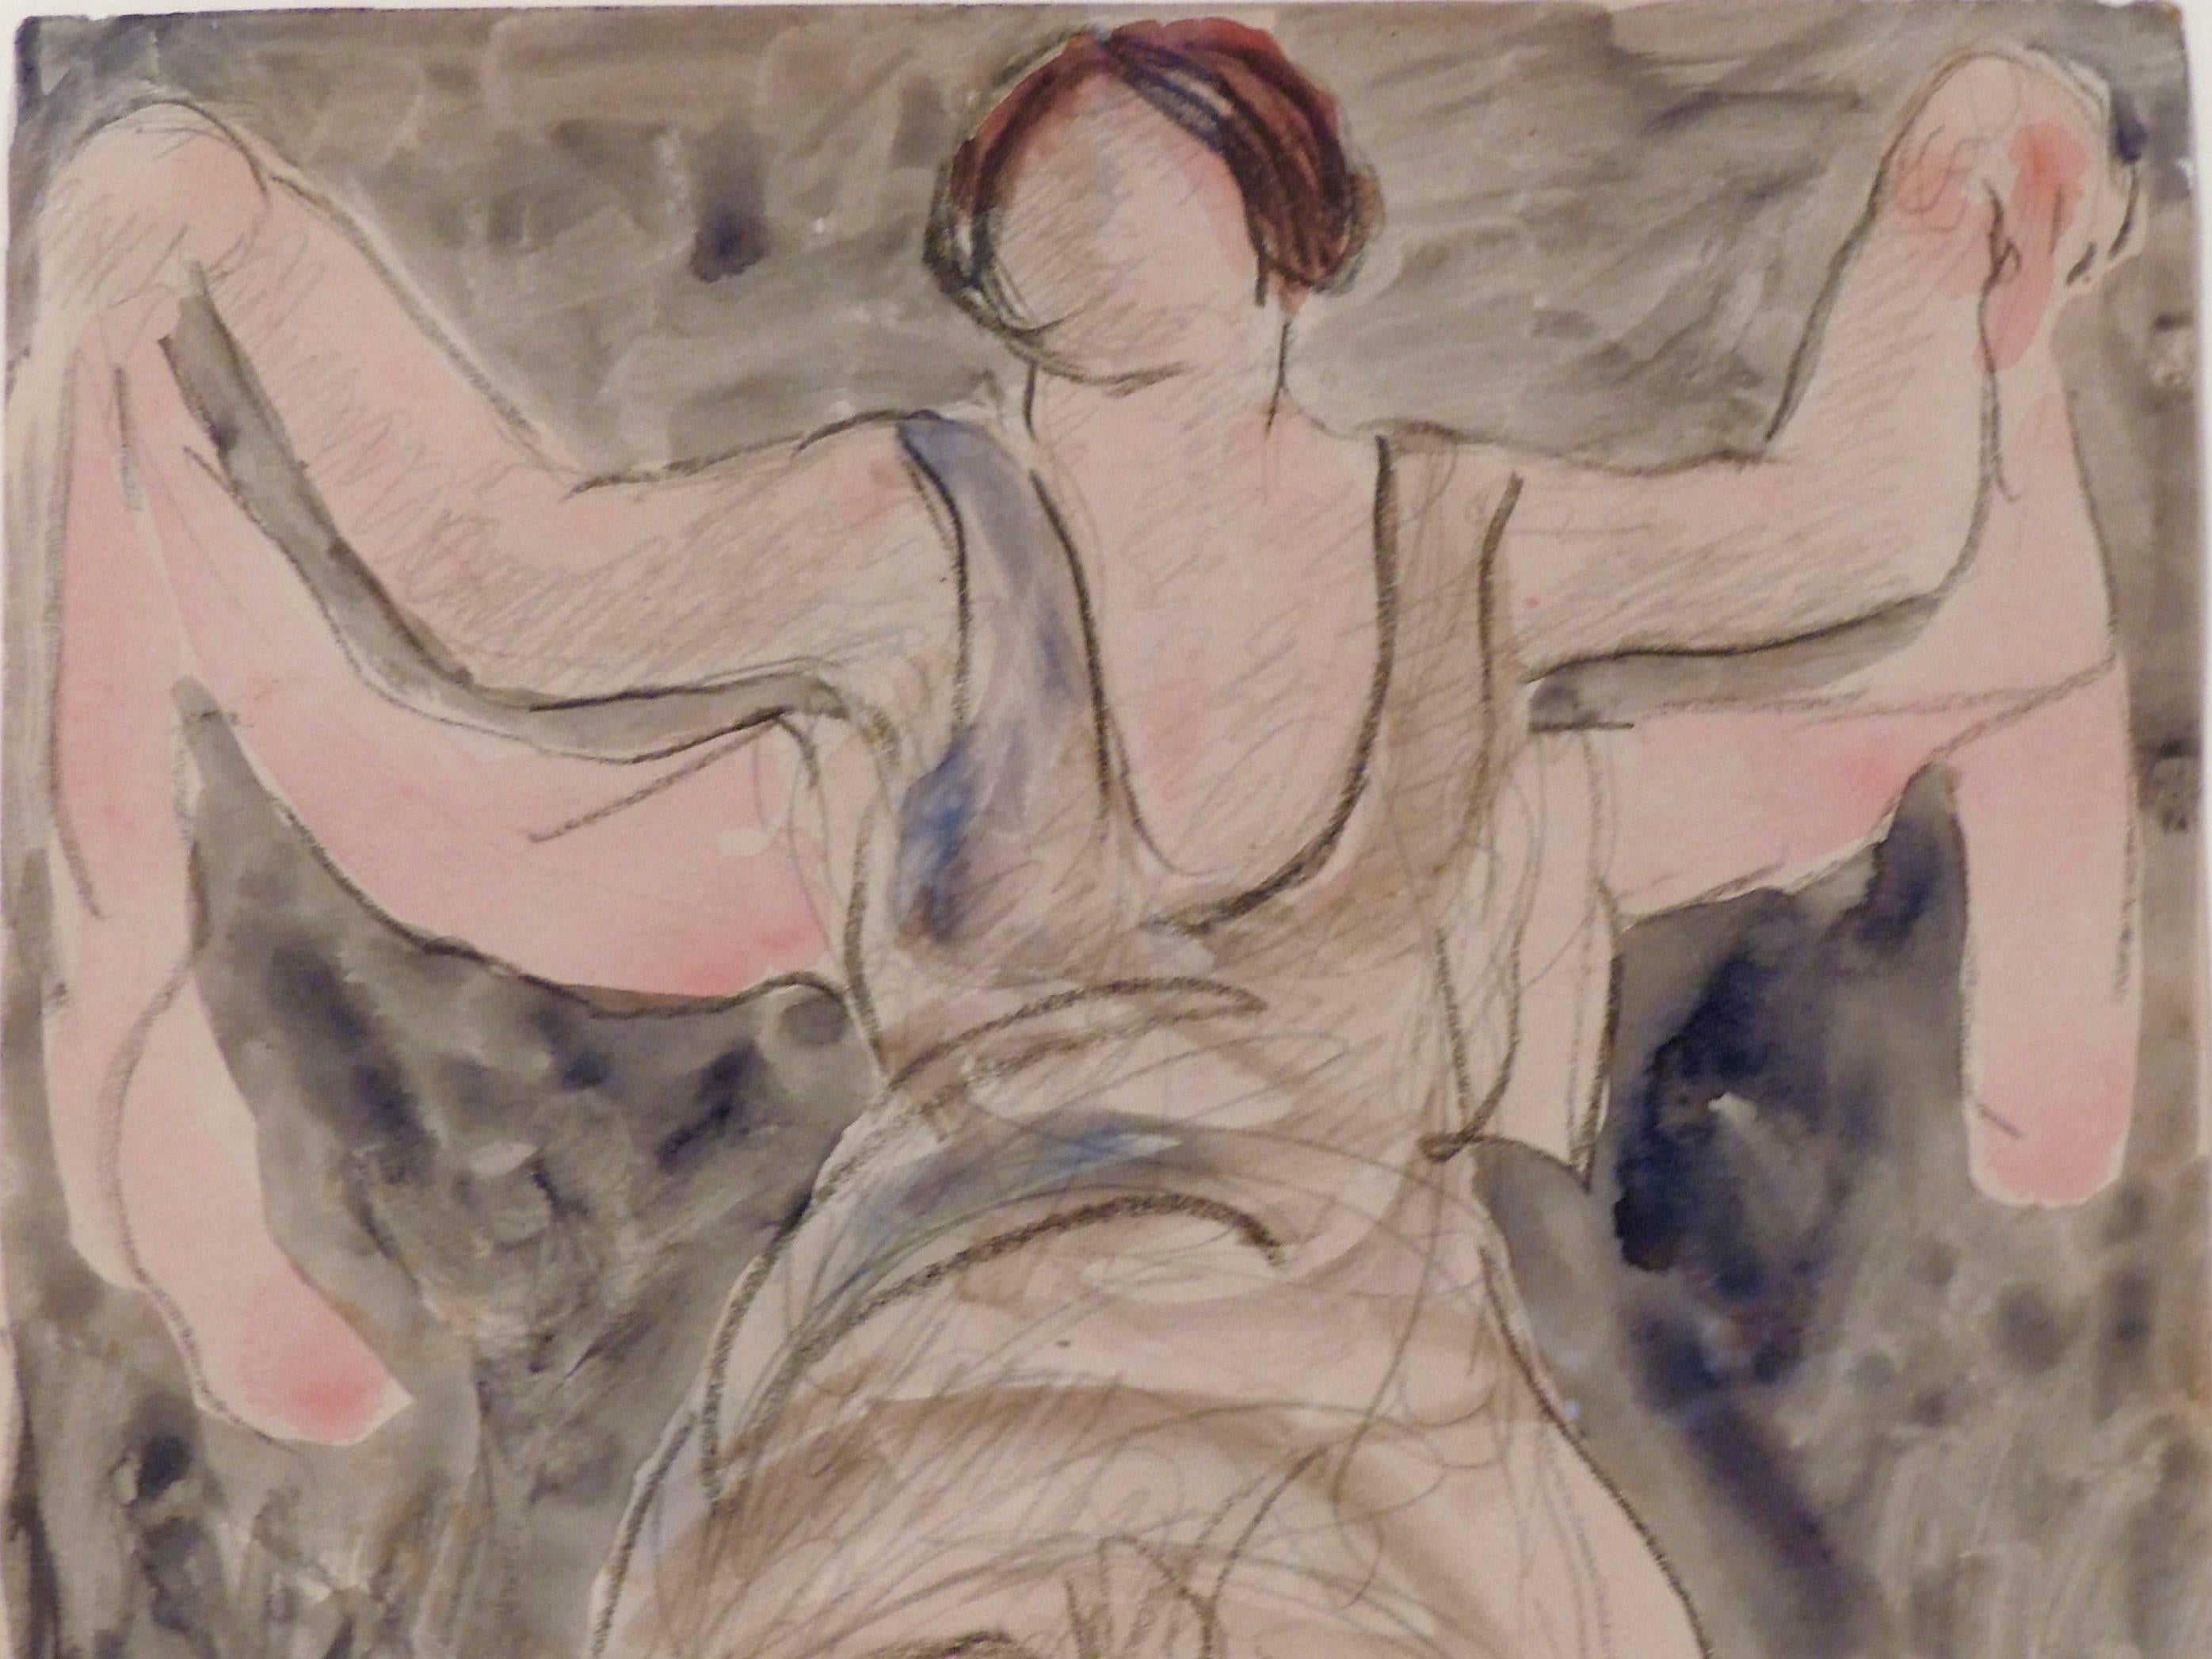 Abraham Walkowitz (1878-1965) had an intimate artistic relationship with the Modernist Dancer Isadora Duncan. He drew her in dance literally thousands of times. This image is a free flowing sketch of her in a brown dress on a blue ground with one of